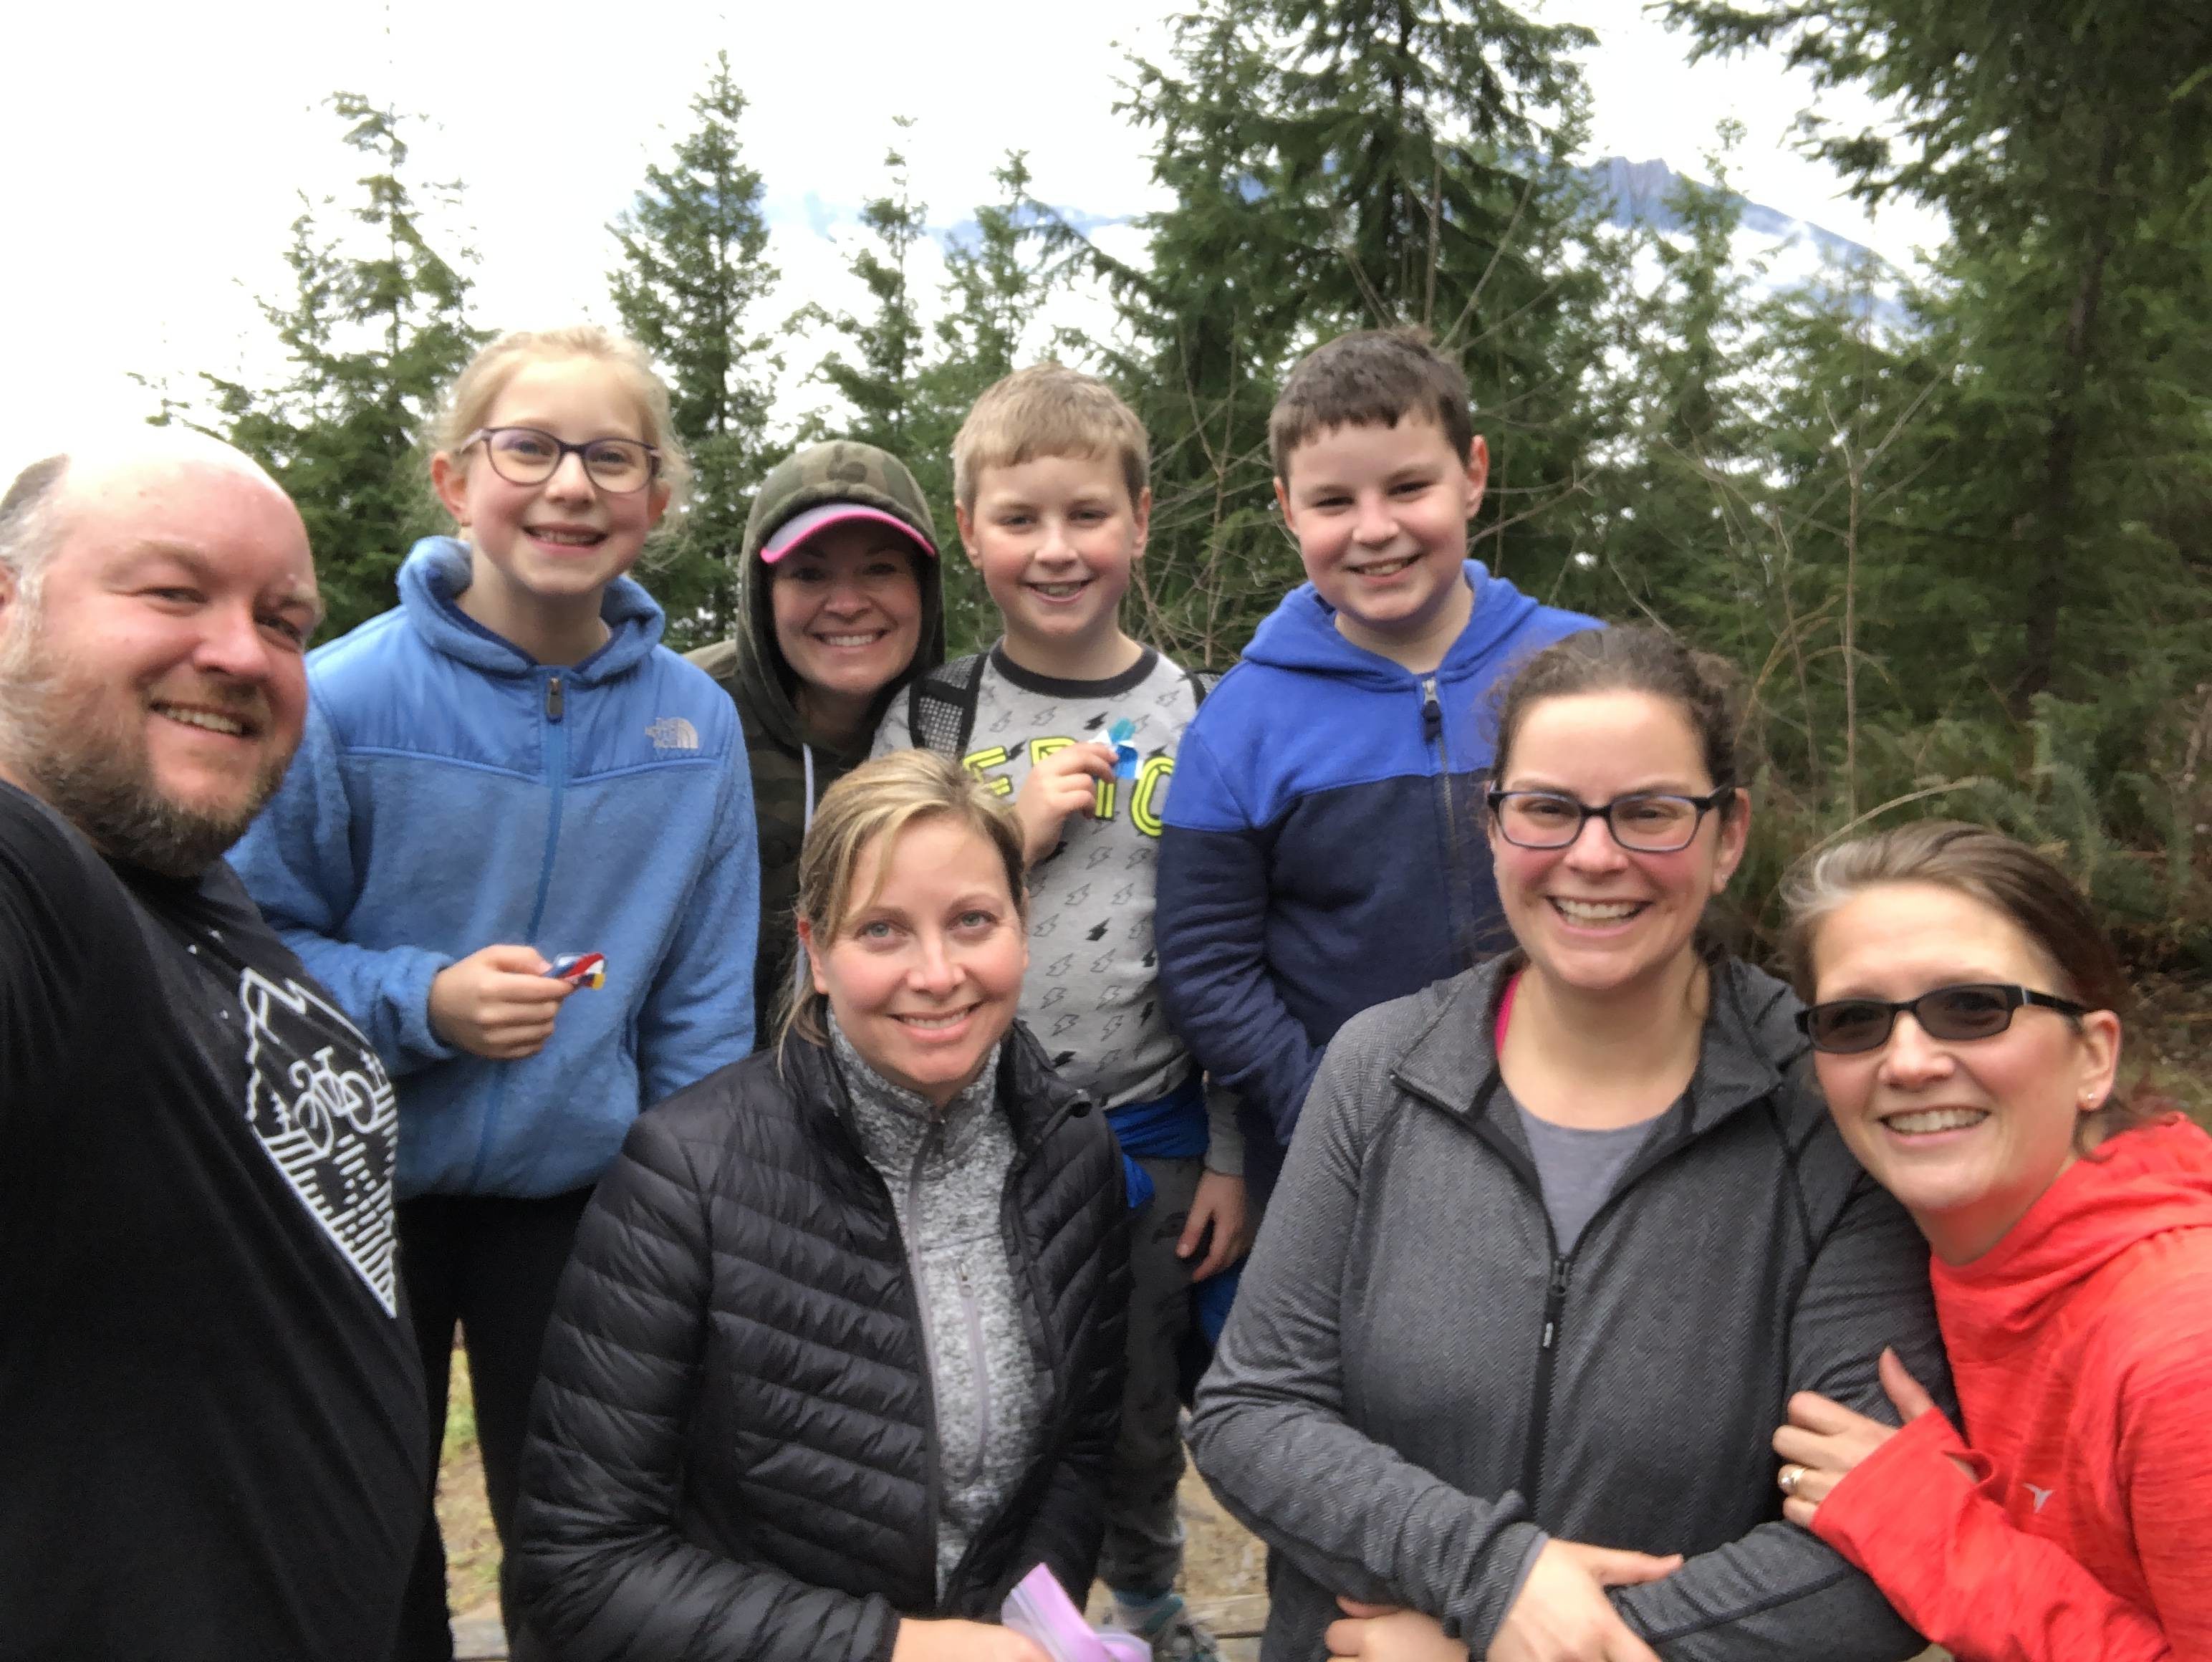 Members of Team Freezin' for a Reason on a recent hike to Stan's Overlook, North Bend, WA